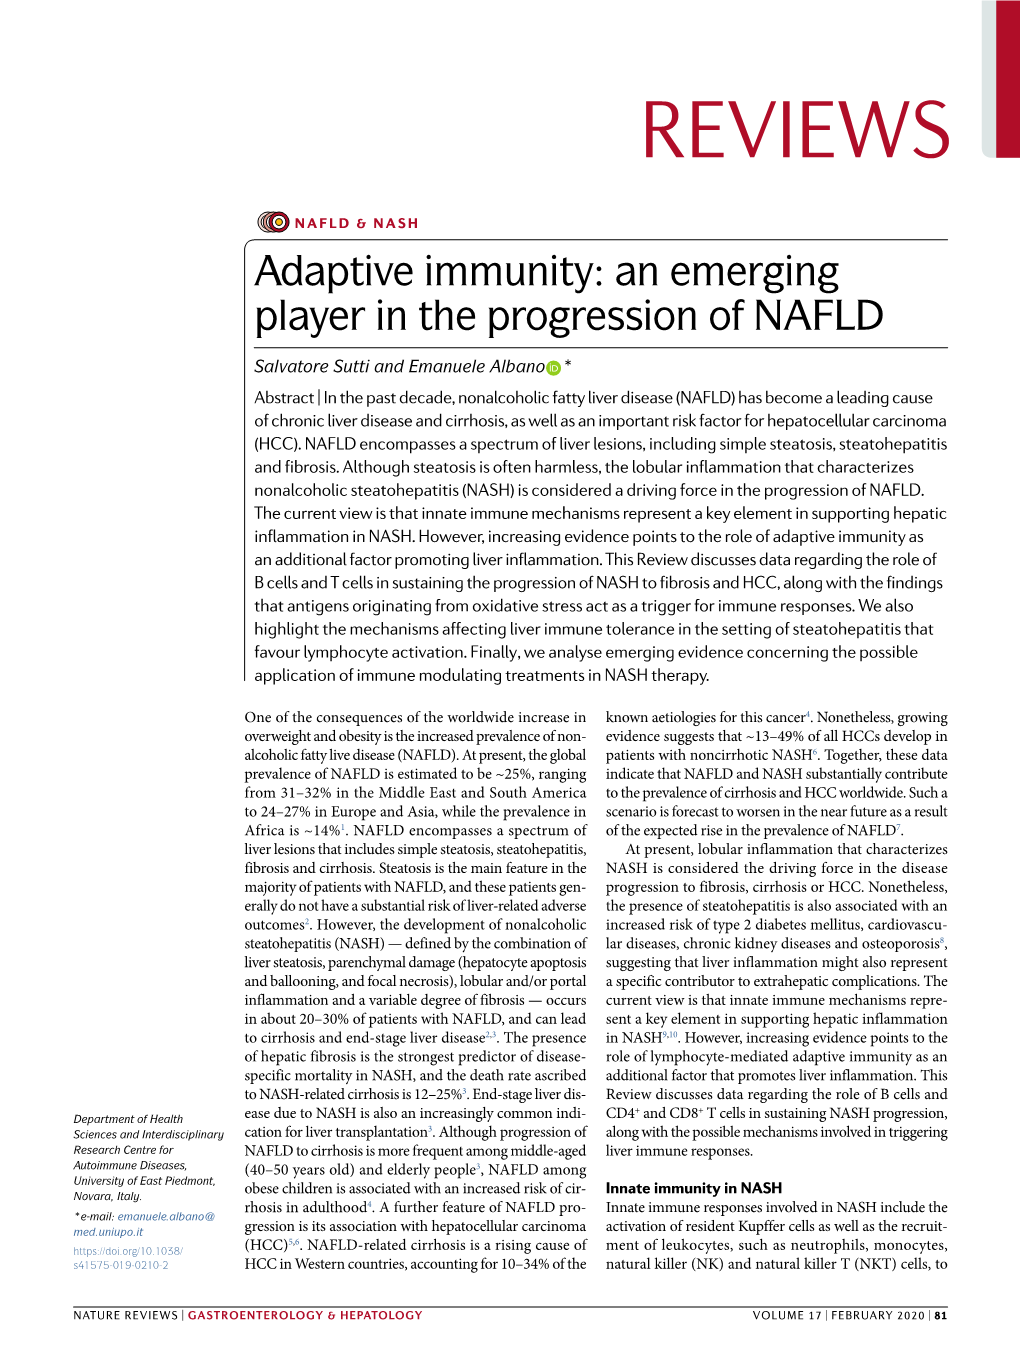 An Emerging Player in the Progression of NAFLD